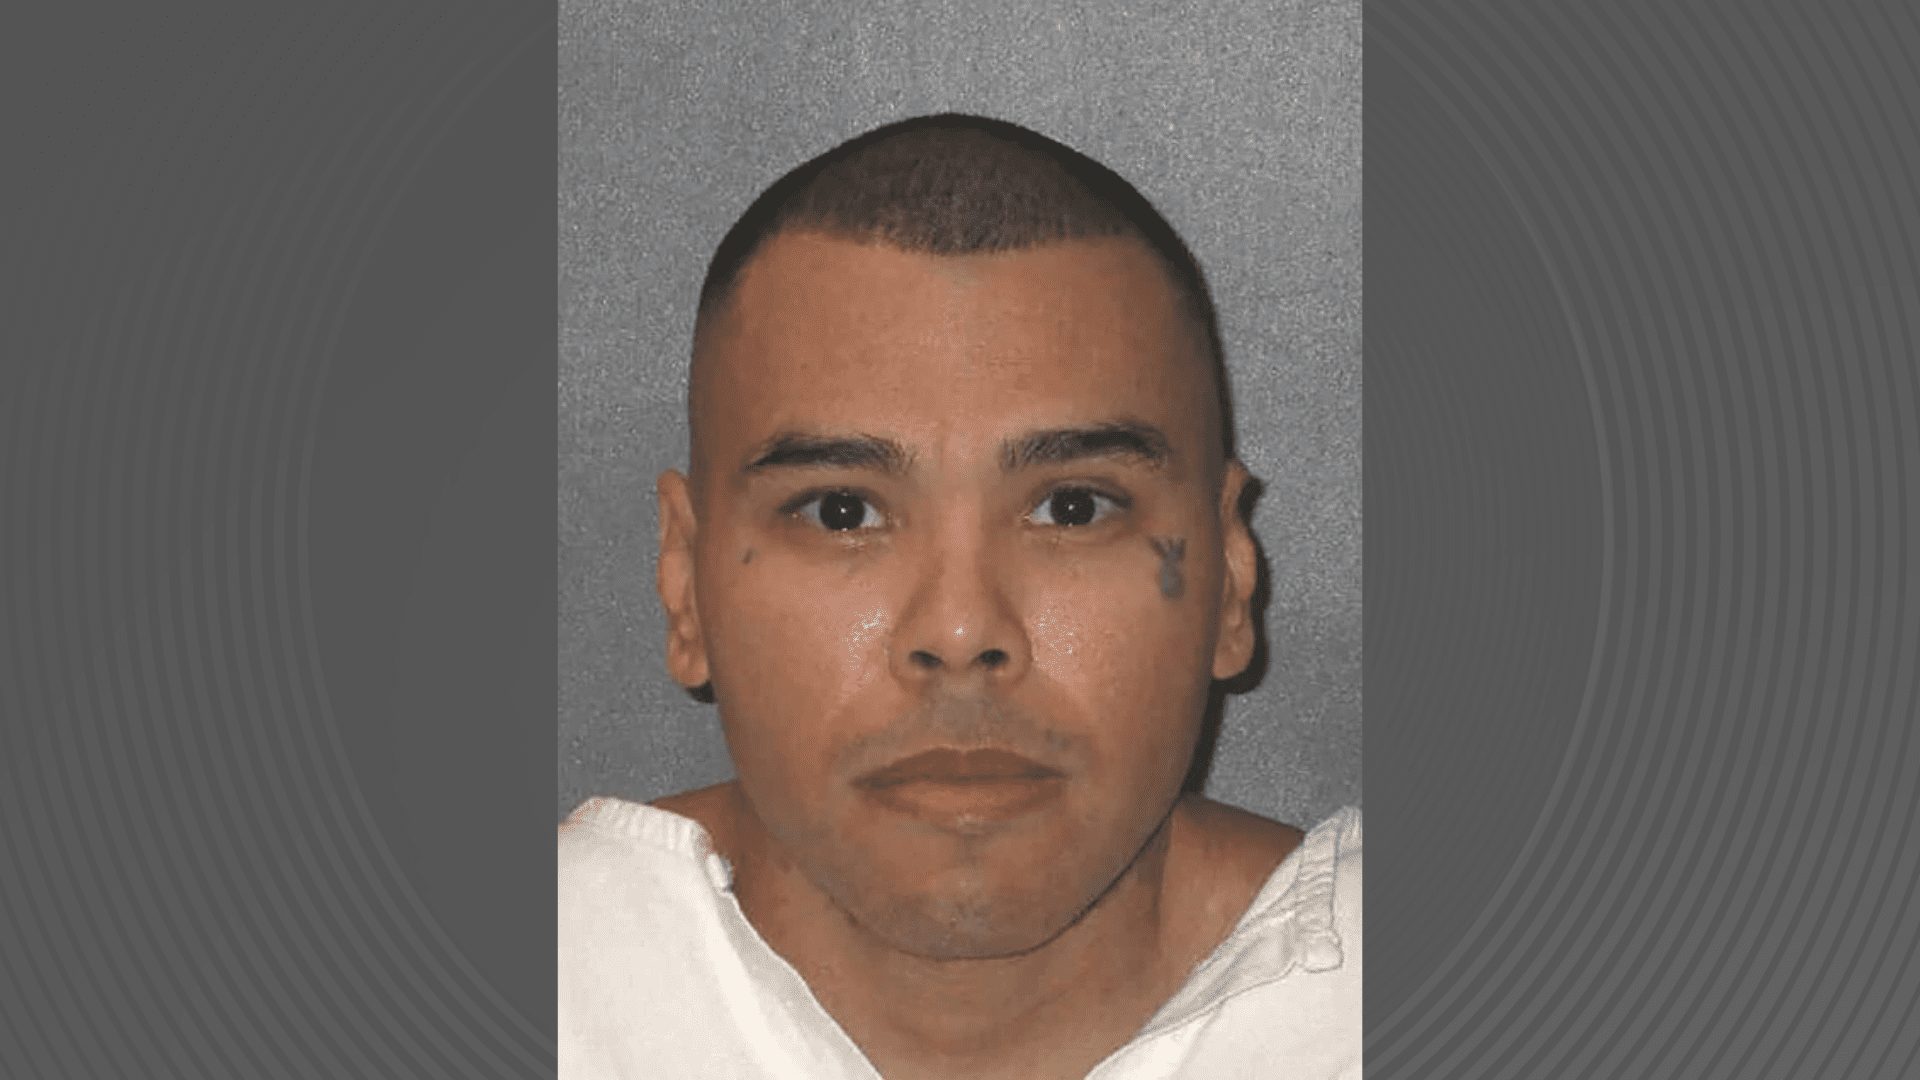 Death Row Inmate to Receive Religious Accommodations at Execution